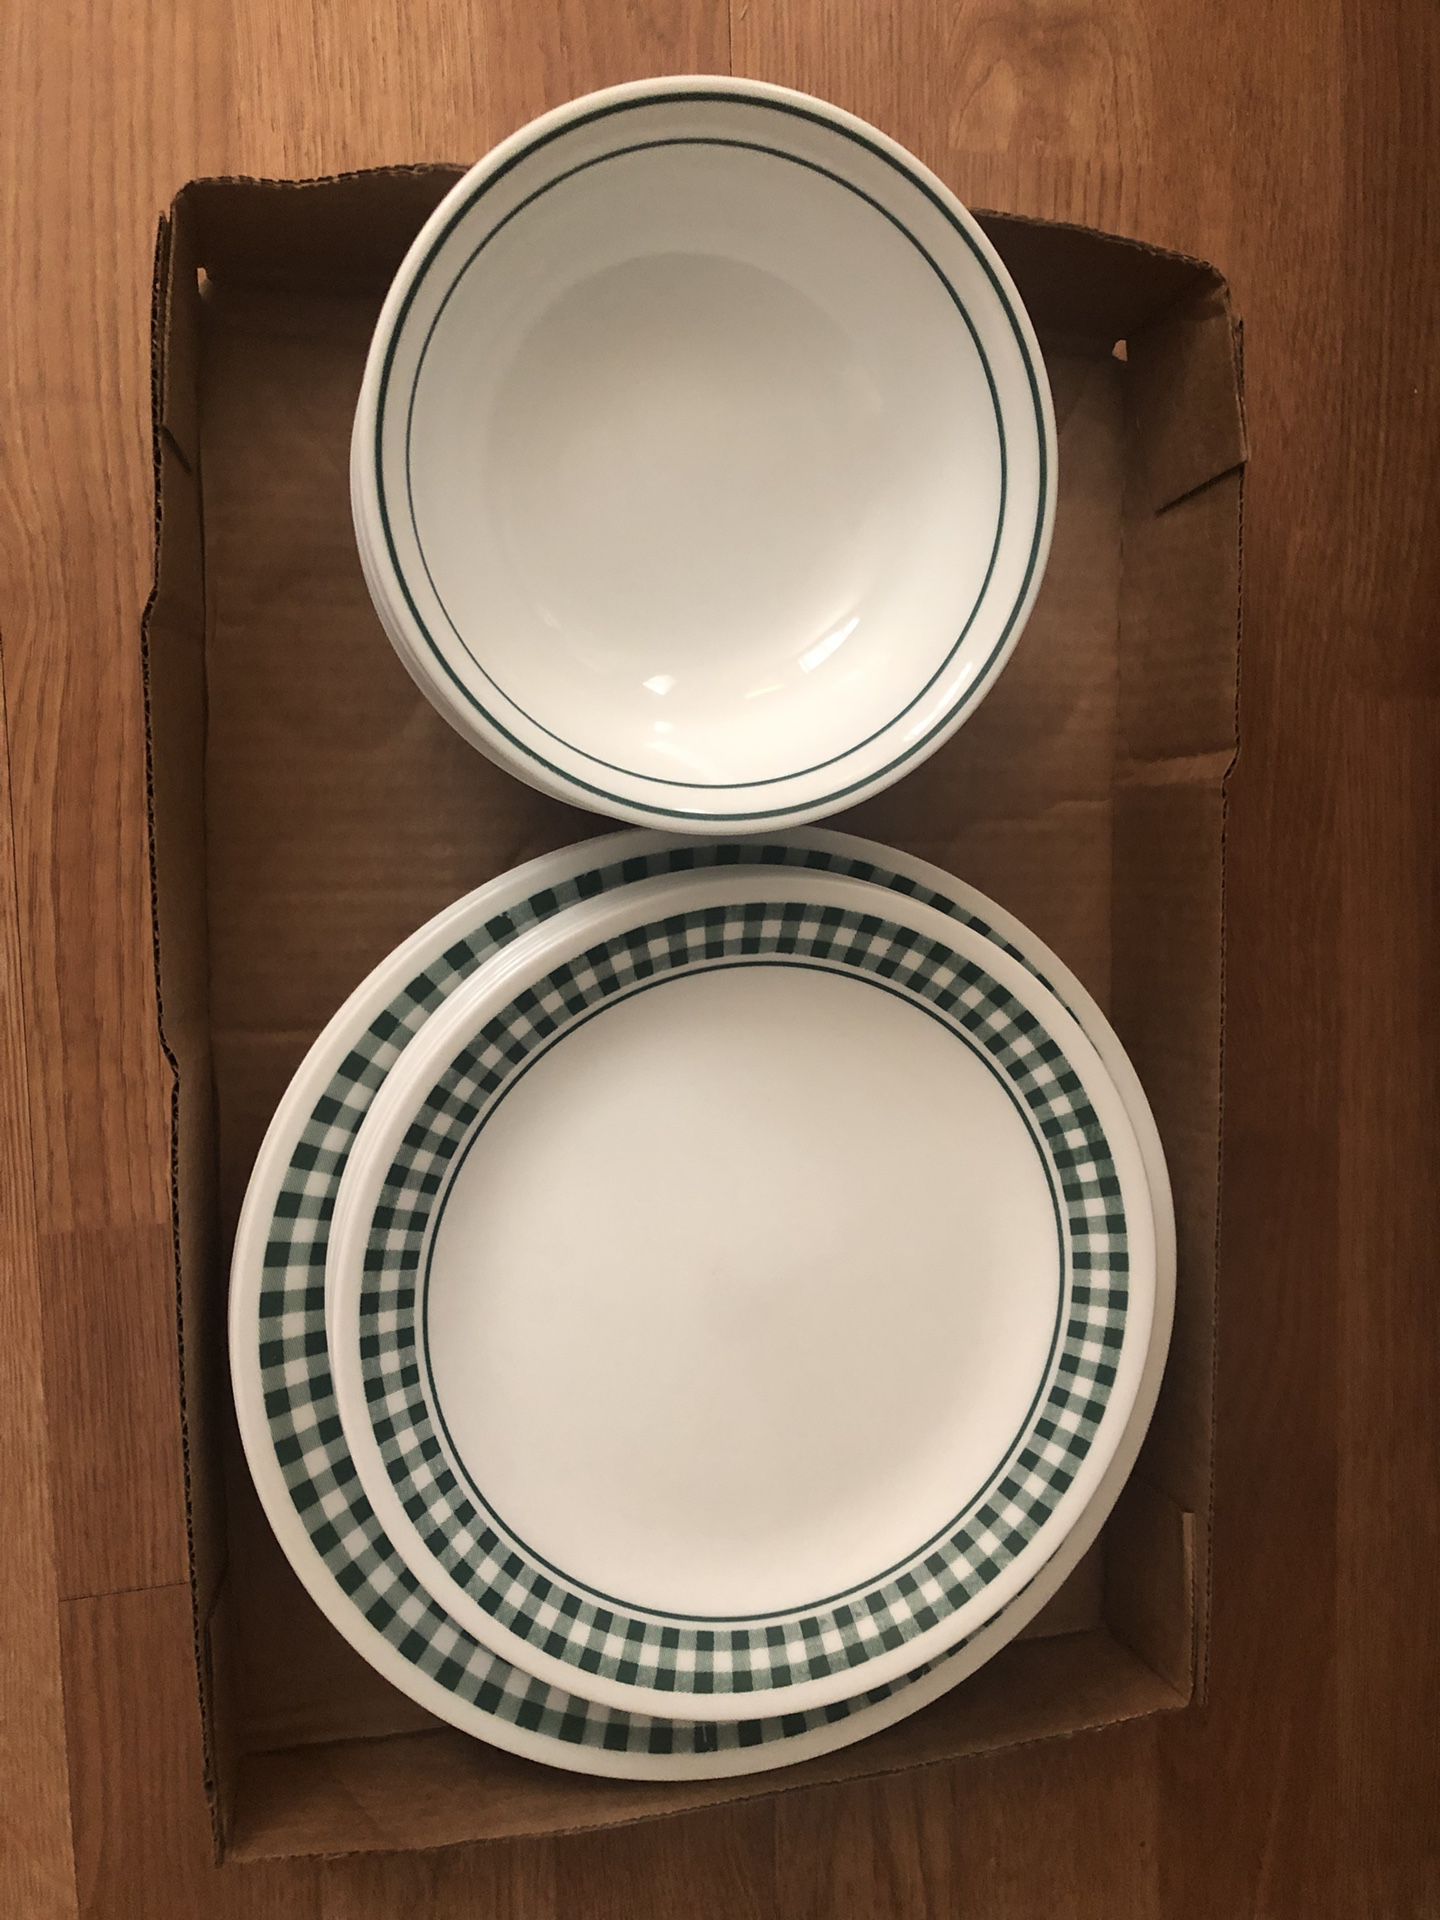 Corelle dishes service for 6 Excellent condition